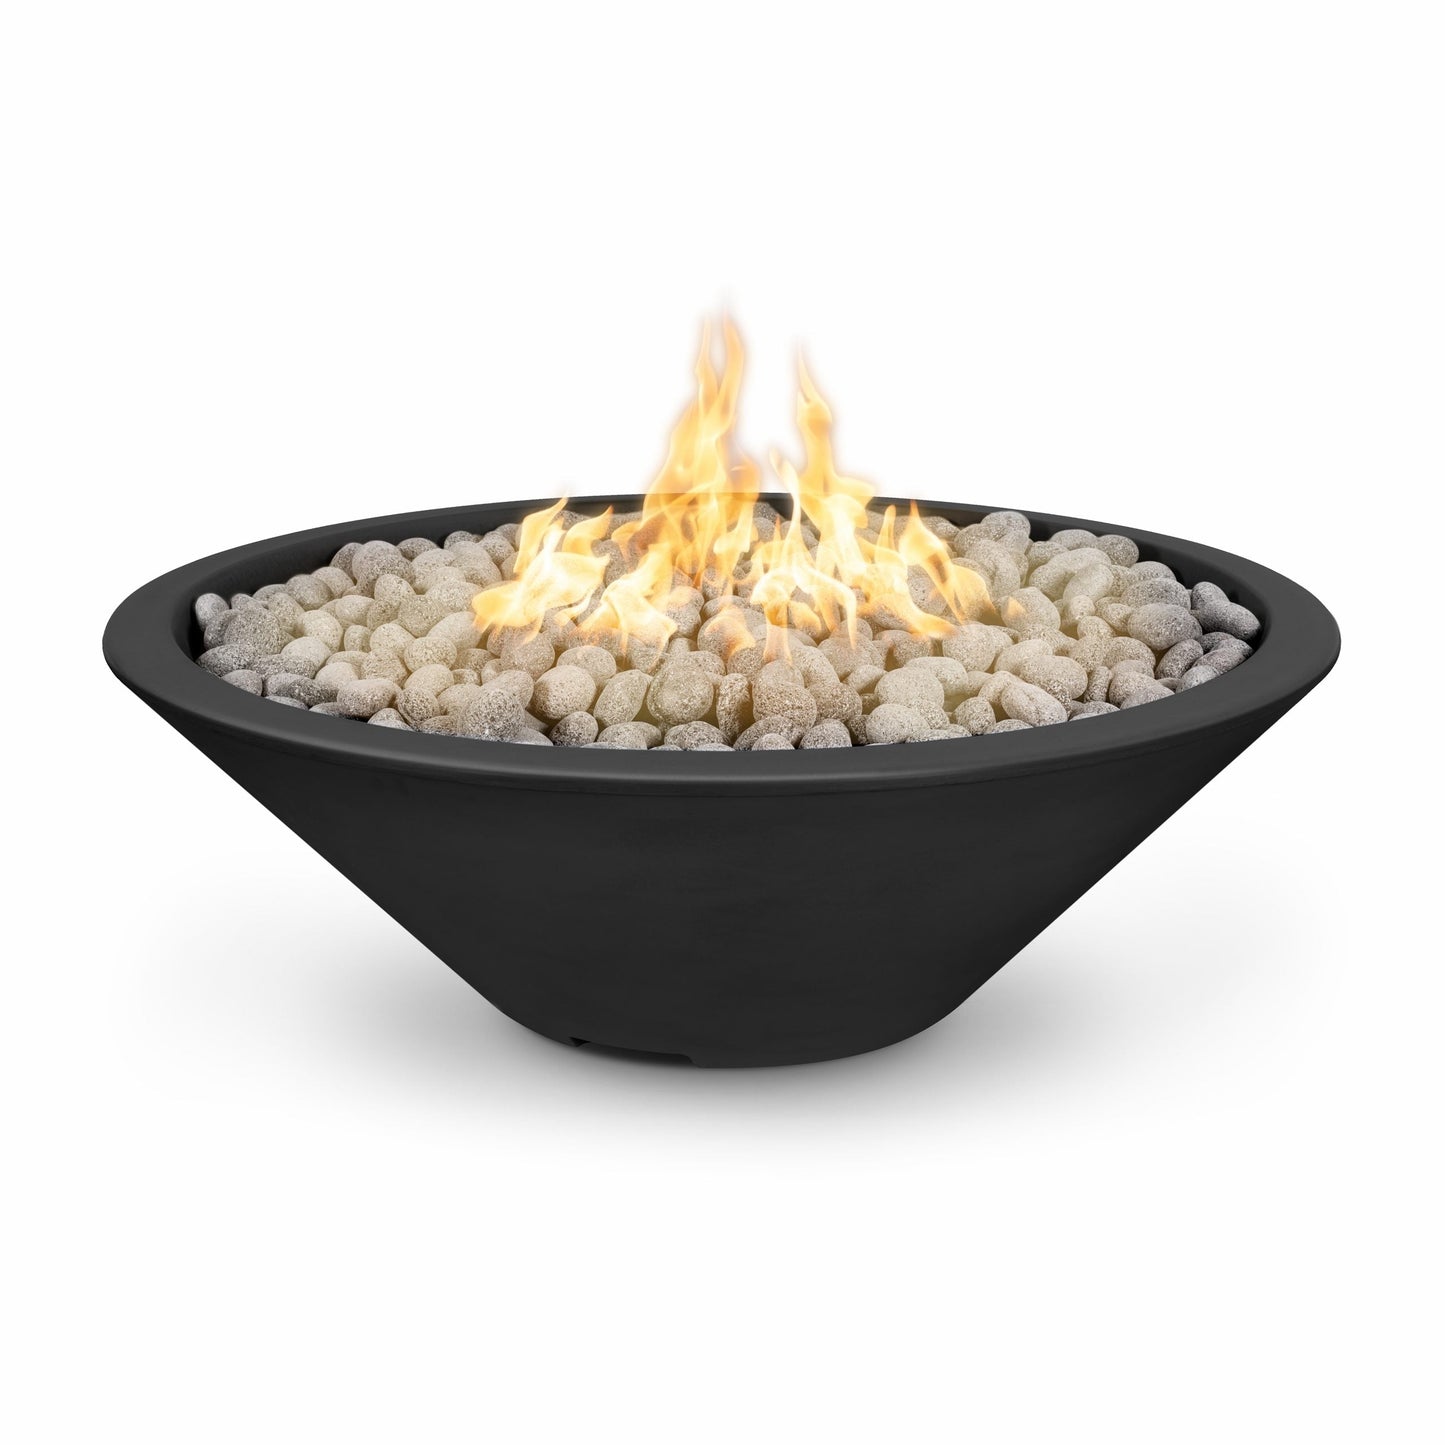 The Outdoor Plus Round Cazo 48" Black Powder Coated Metal Natural Gas Fire Pit with 110V Electronic Ignition